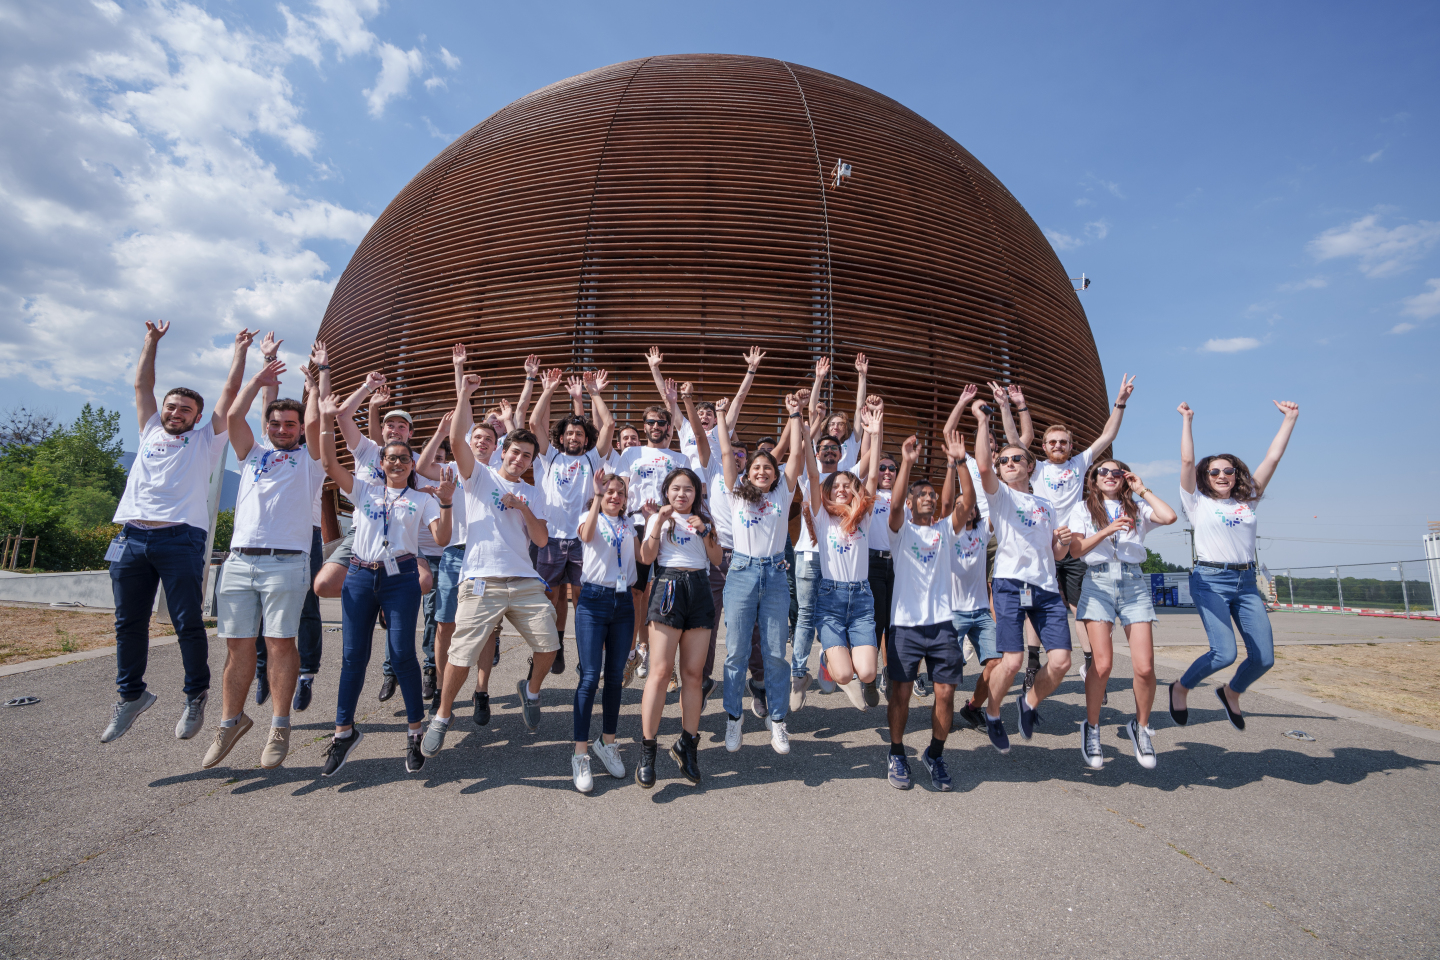 Group photo of CERN openlab summer students in front of CERN's Globe of Science and Innovation. (Image: CERN)